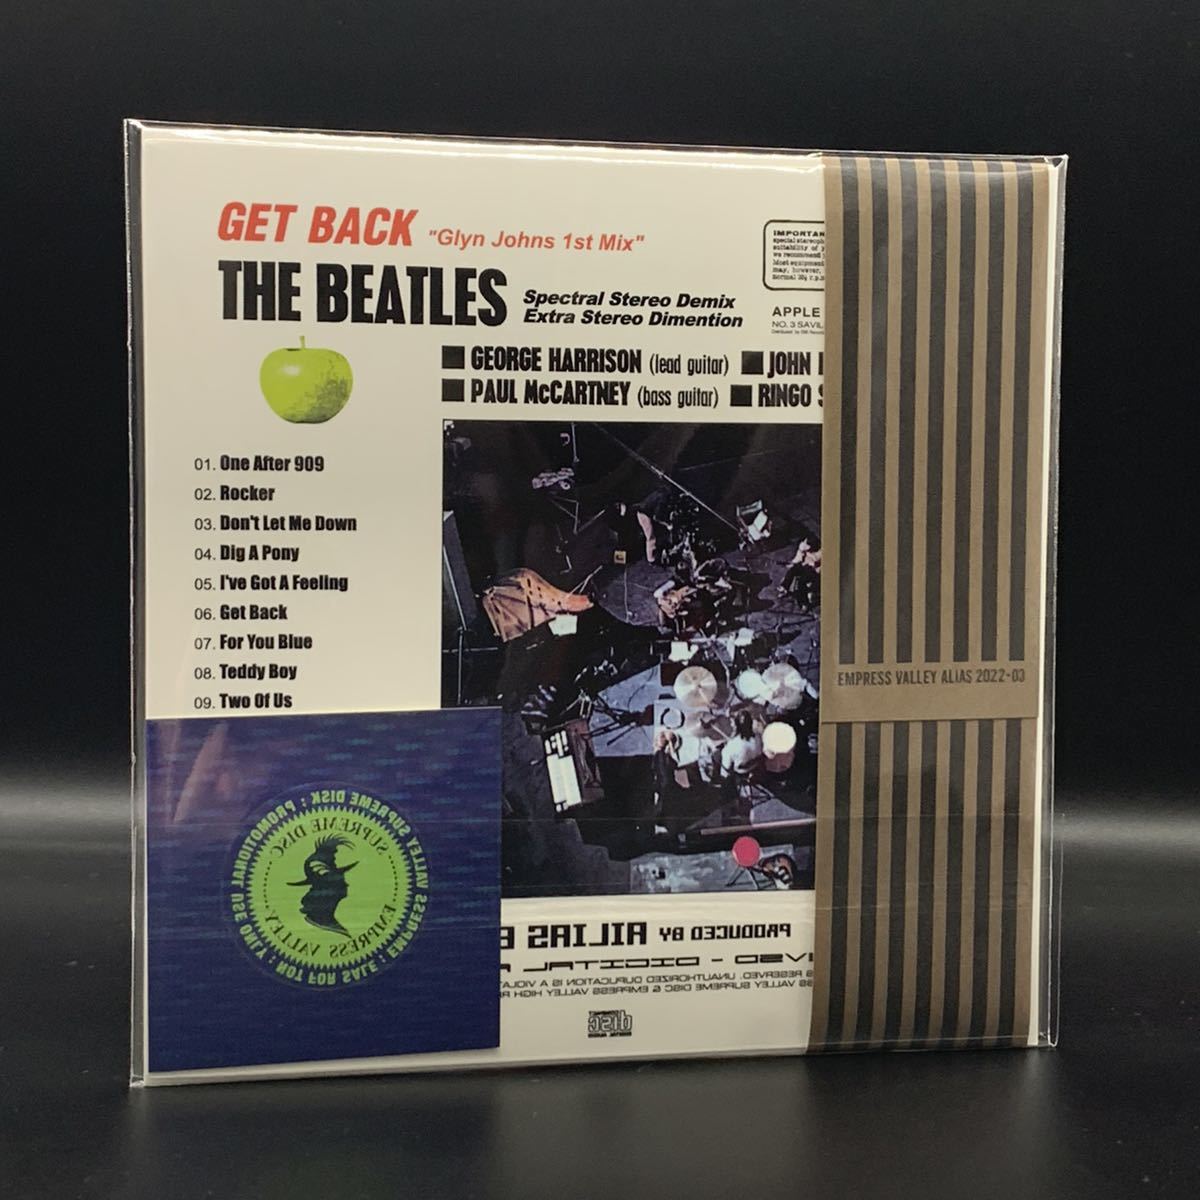 THE BEATLES : GET BACK STEREO DEMIX (CD) 1CD 工場プレス銀盤CD ■欧米輸入限定盤　■限定100セット 通常盤ジャケ違い！